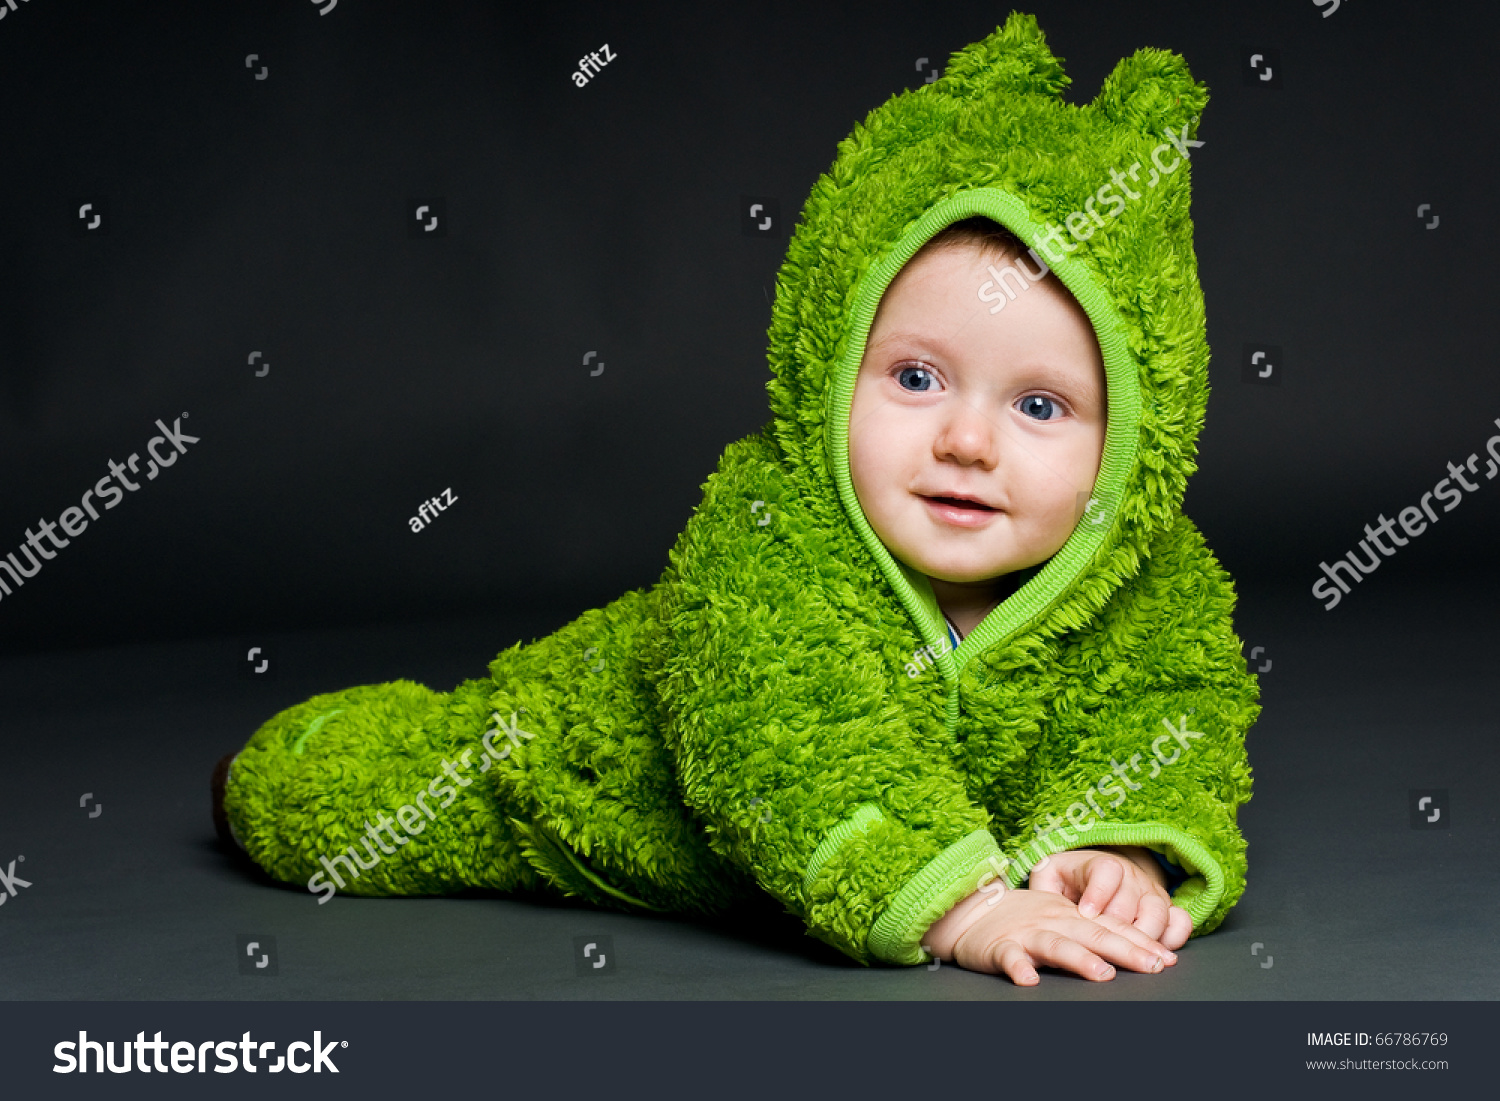 Sweet Cute Baby Dressed In A Frog Suit Stock Photo 66786769 : Shutterstock